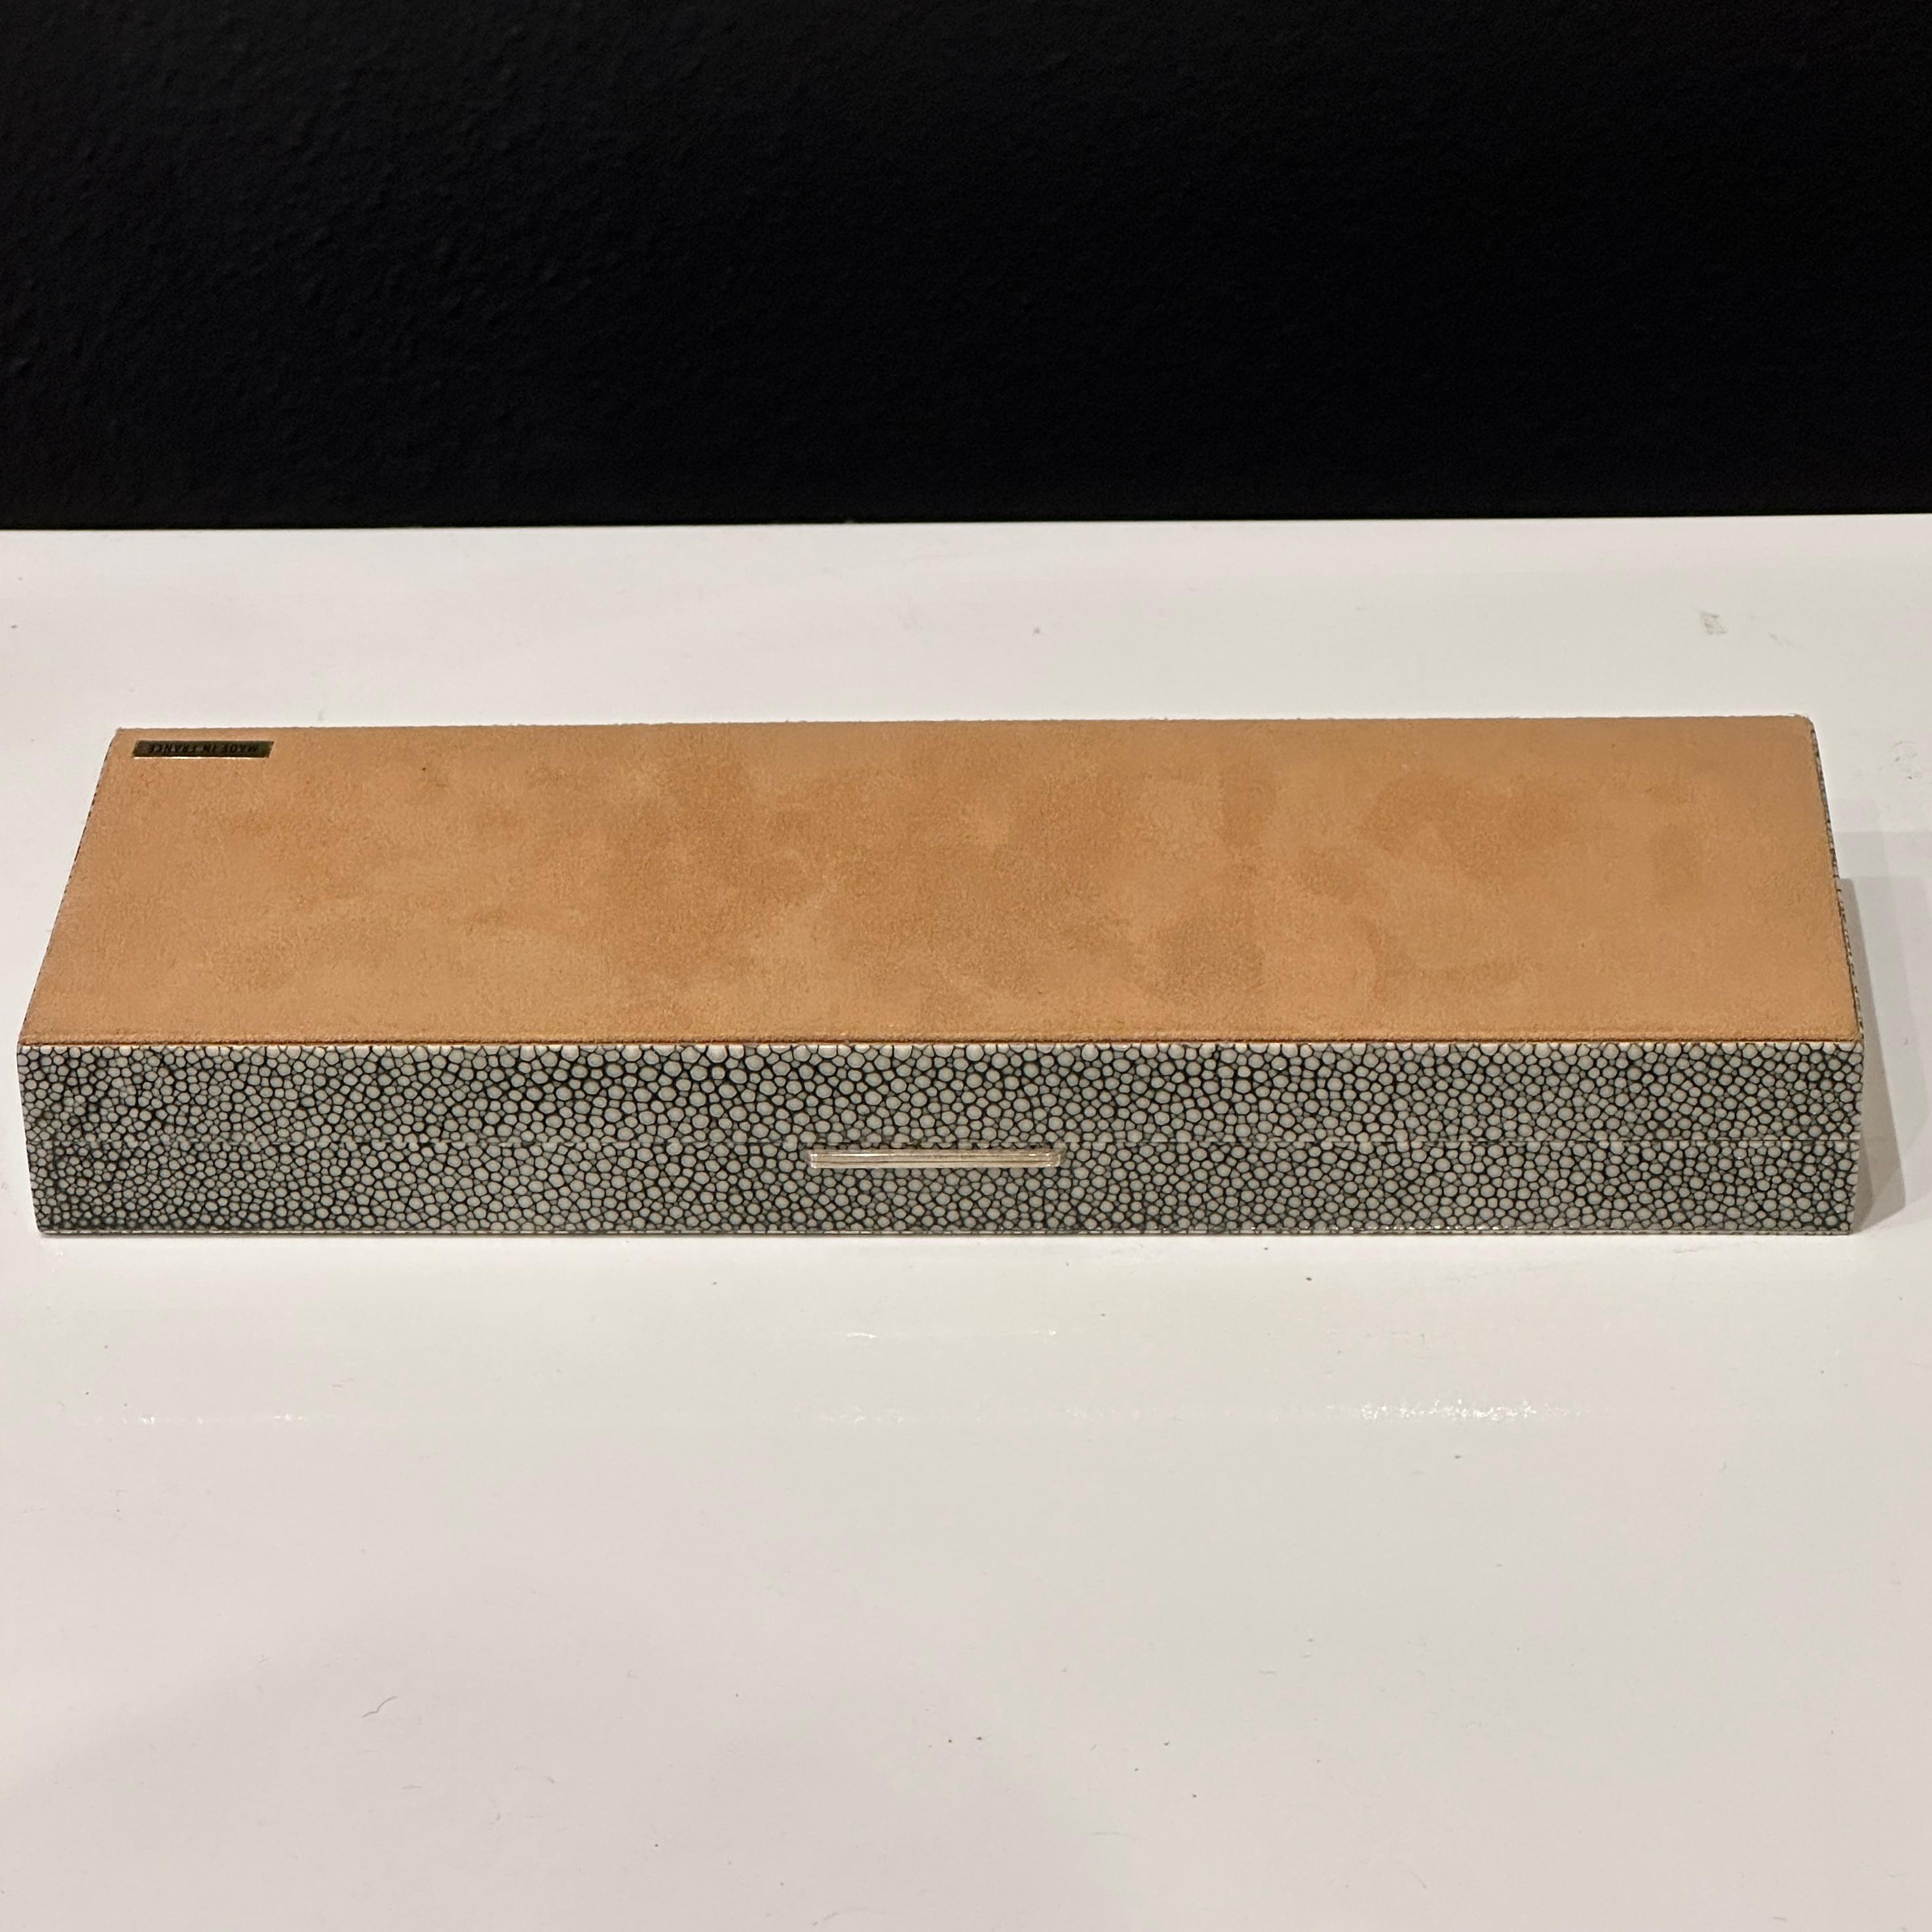 Elie Bleu France Shagreen Eight Compartment Cufflink or Ring Box, ca 2000s In Excellent Condition For Sale In Cathedral City, CA